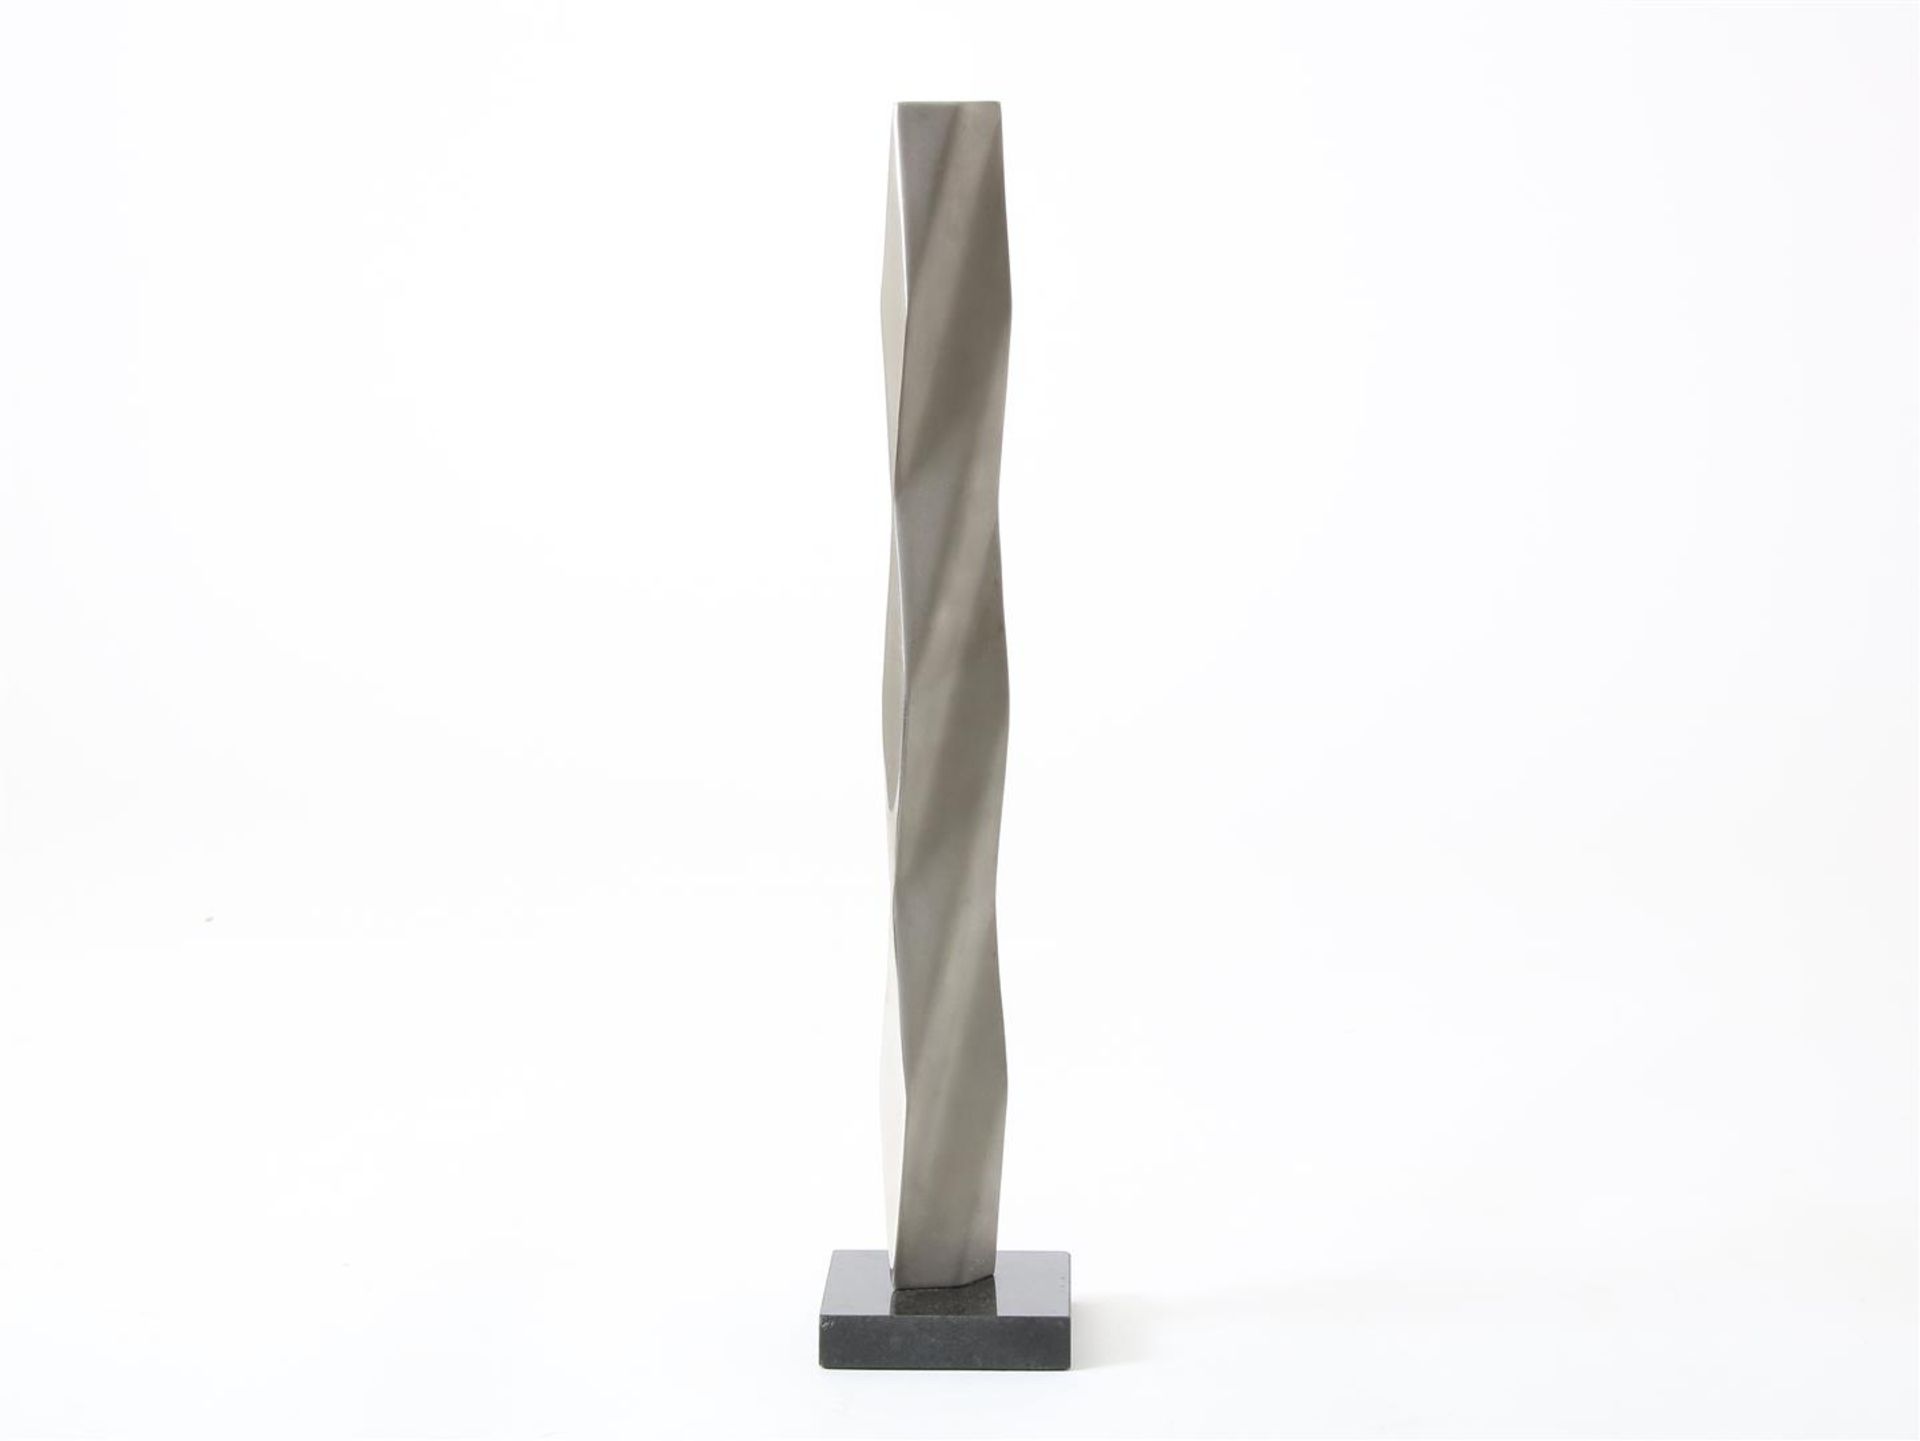 John Spek (1950-) 'Symbiosis', geometric abstract sculpture of metal on granite base, signed and